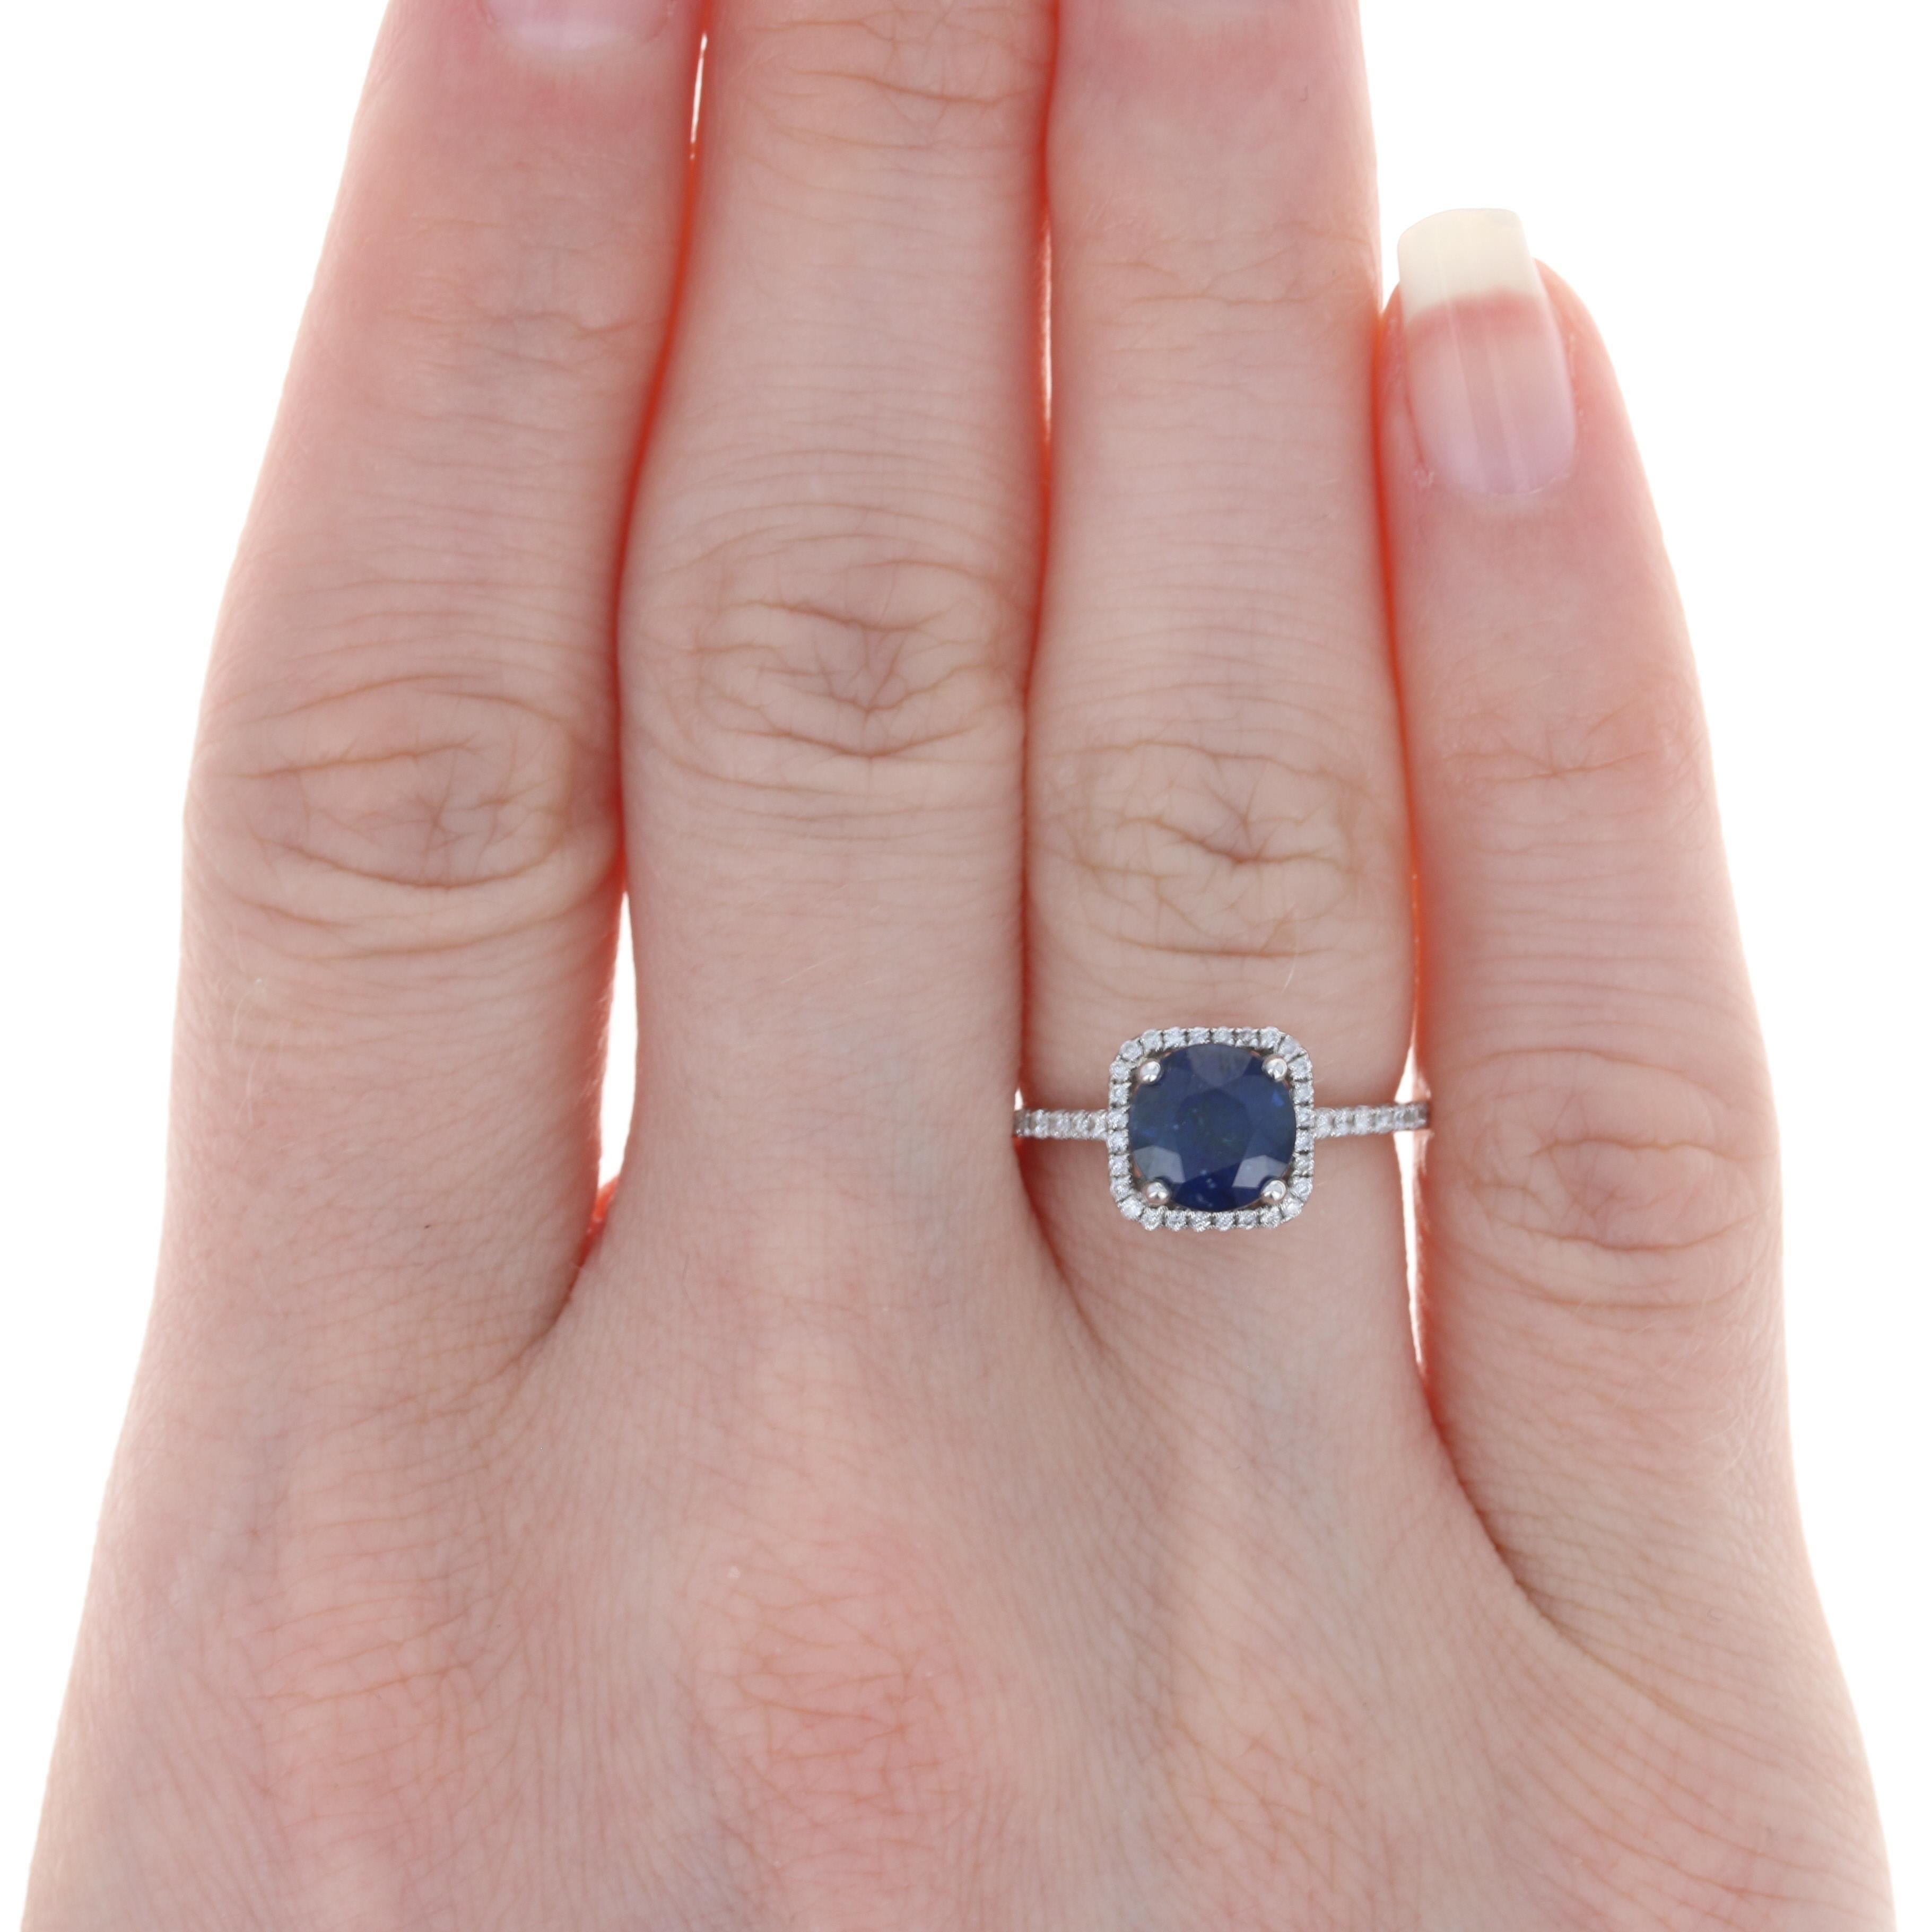 Size: 5
 Sizing Fee: Up 2 sizes for $25 
 
 Metal Content: 14k White Gold
 
 Stone Information: 
 Genuine Sapphire
 Treatment: Heating
 Carat: 1.87ct (weighed)
 Cut: Round
 Color: Blue
 Diameter: 7mm 
 
 Natural Diamonds
 Carats: .20ctw
 Cut: Round